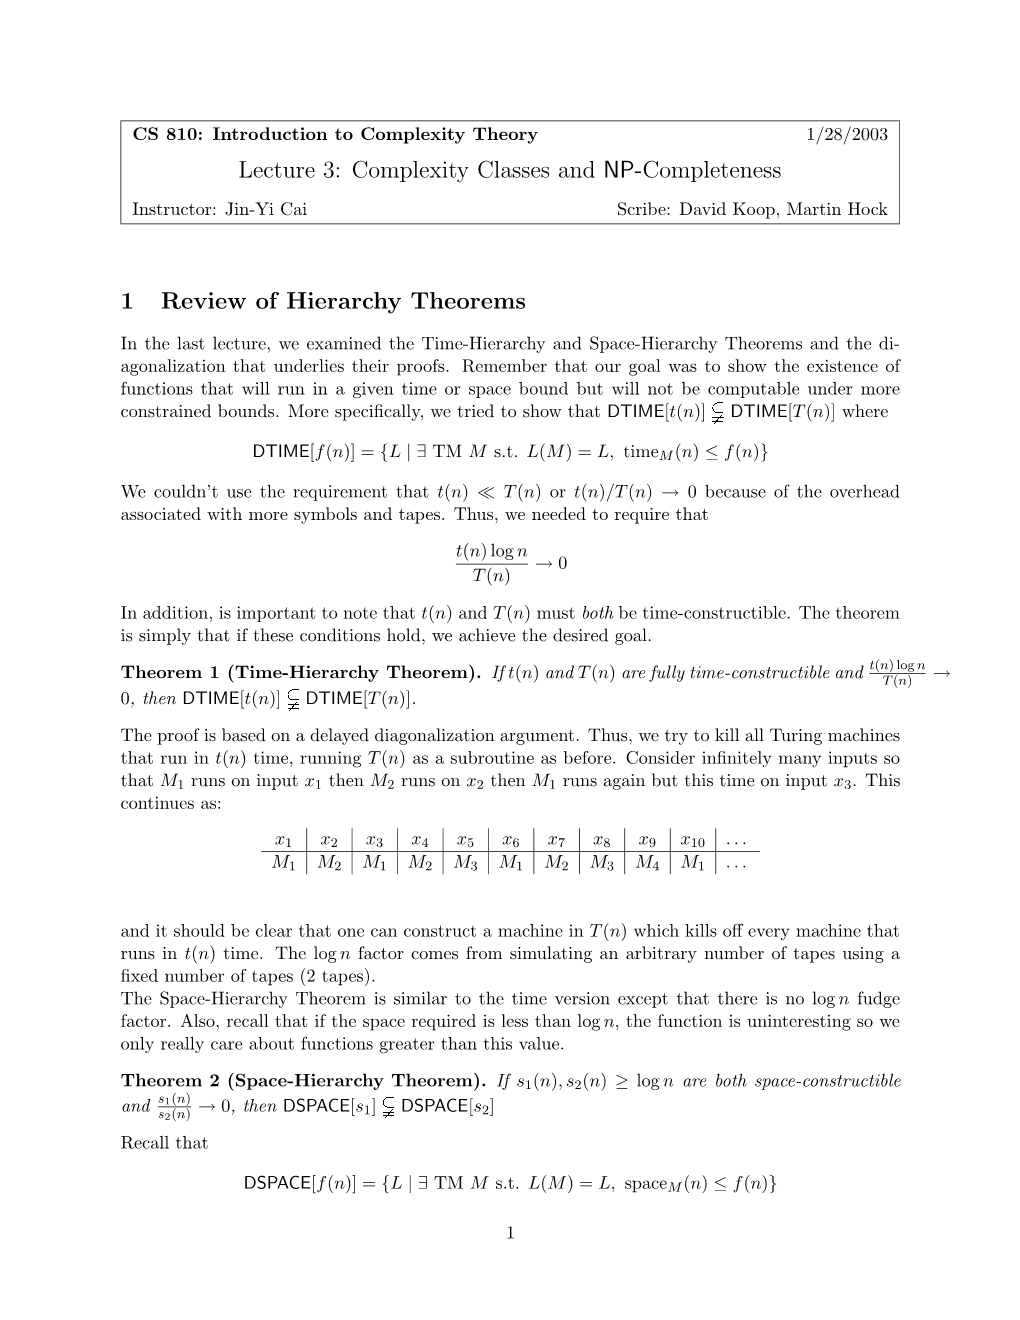 Lecture 3: Complexity Classes and NP-Completeness 1 Review Of